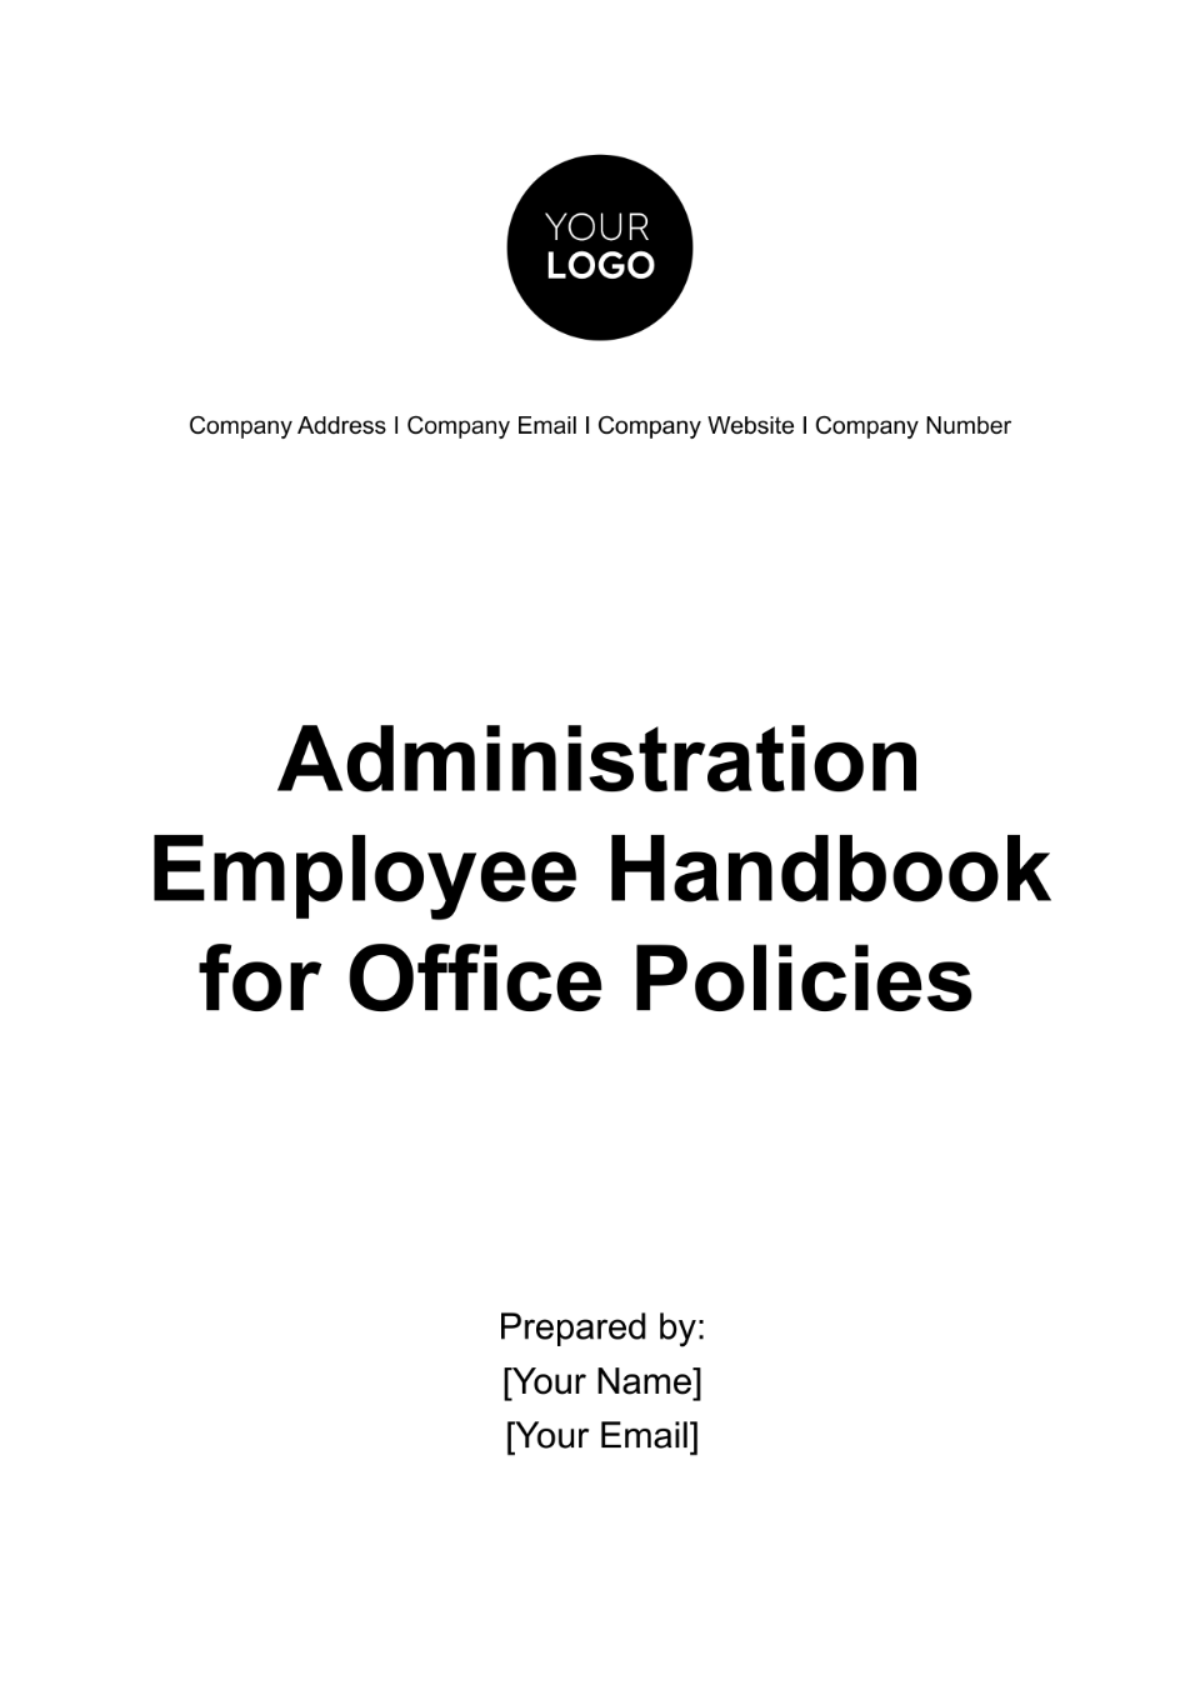 Free Administration Employee Handbook for Office Policies Template